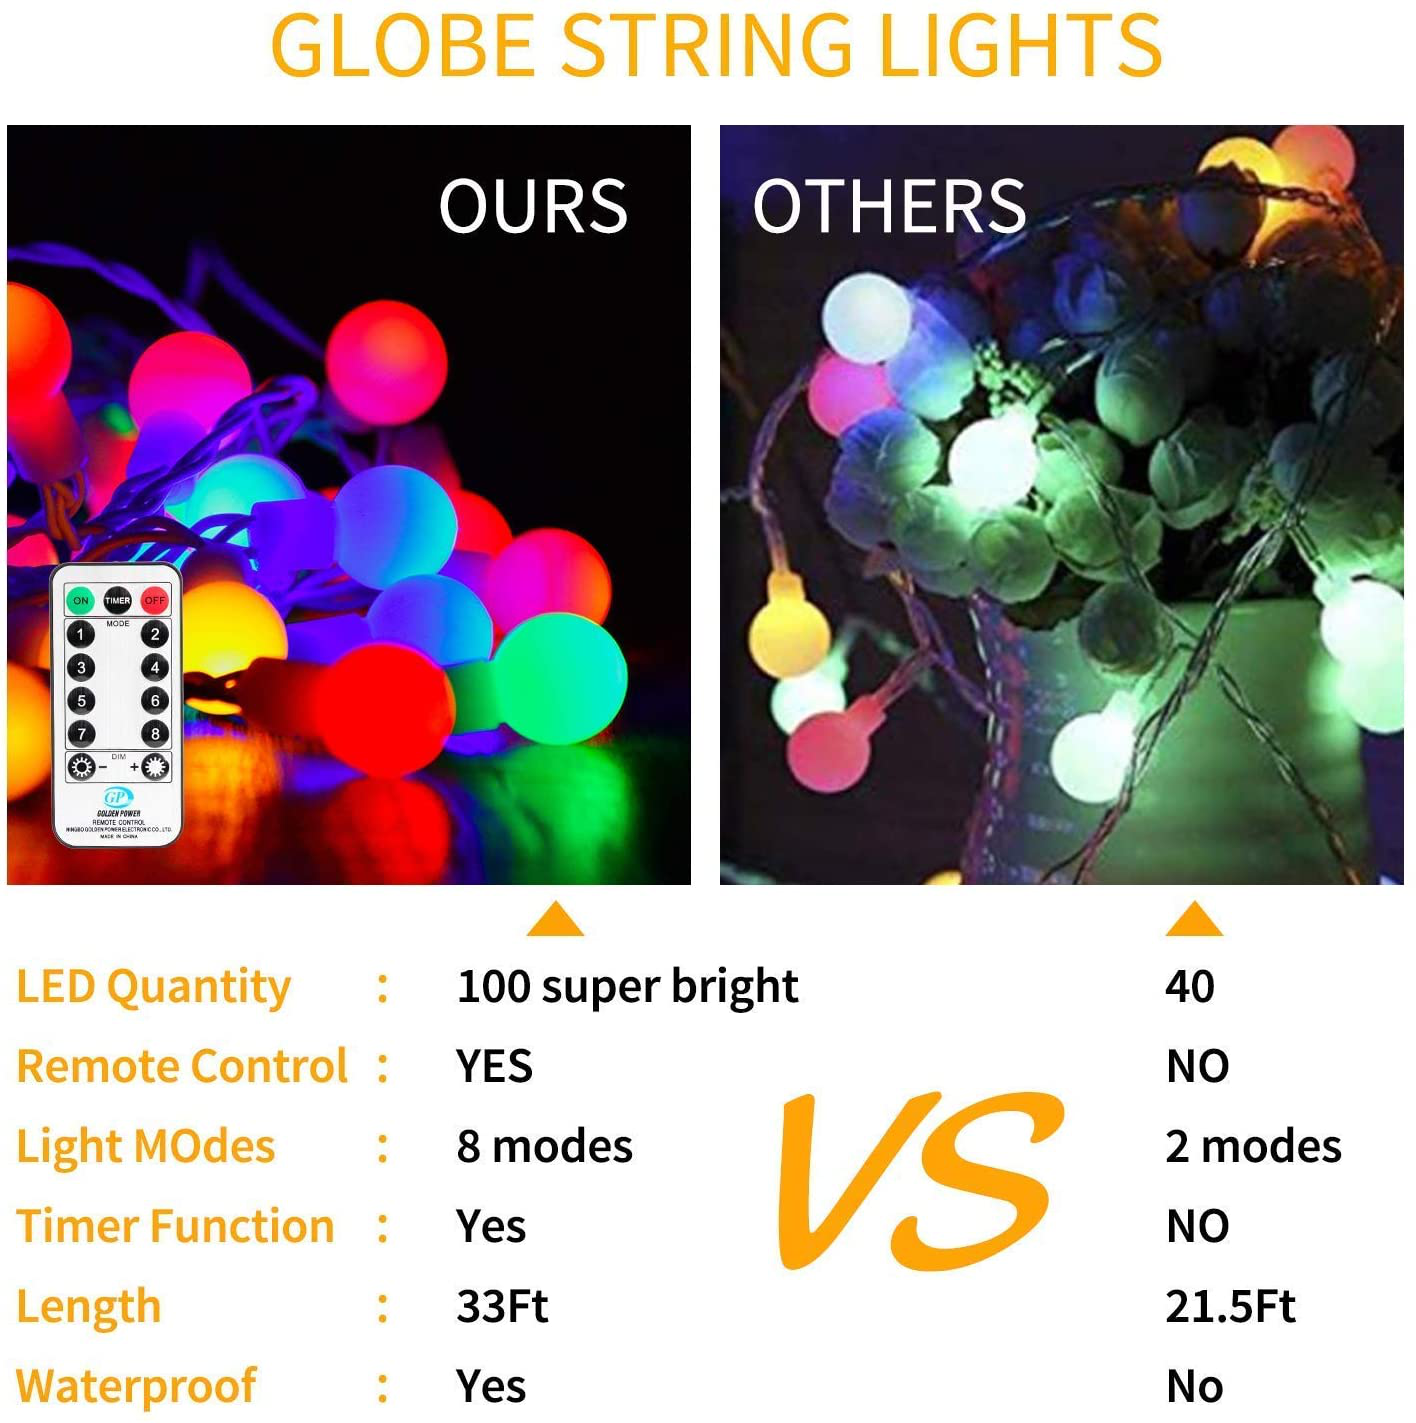 33 Feet 100 Led Mini Globe String Lights, USB Fairy String Lights Plug in, 8 Modes with Remote, Decor for Indoor Outdoor Party Wedding Christmas Tree Garden, Warm and Multi